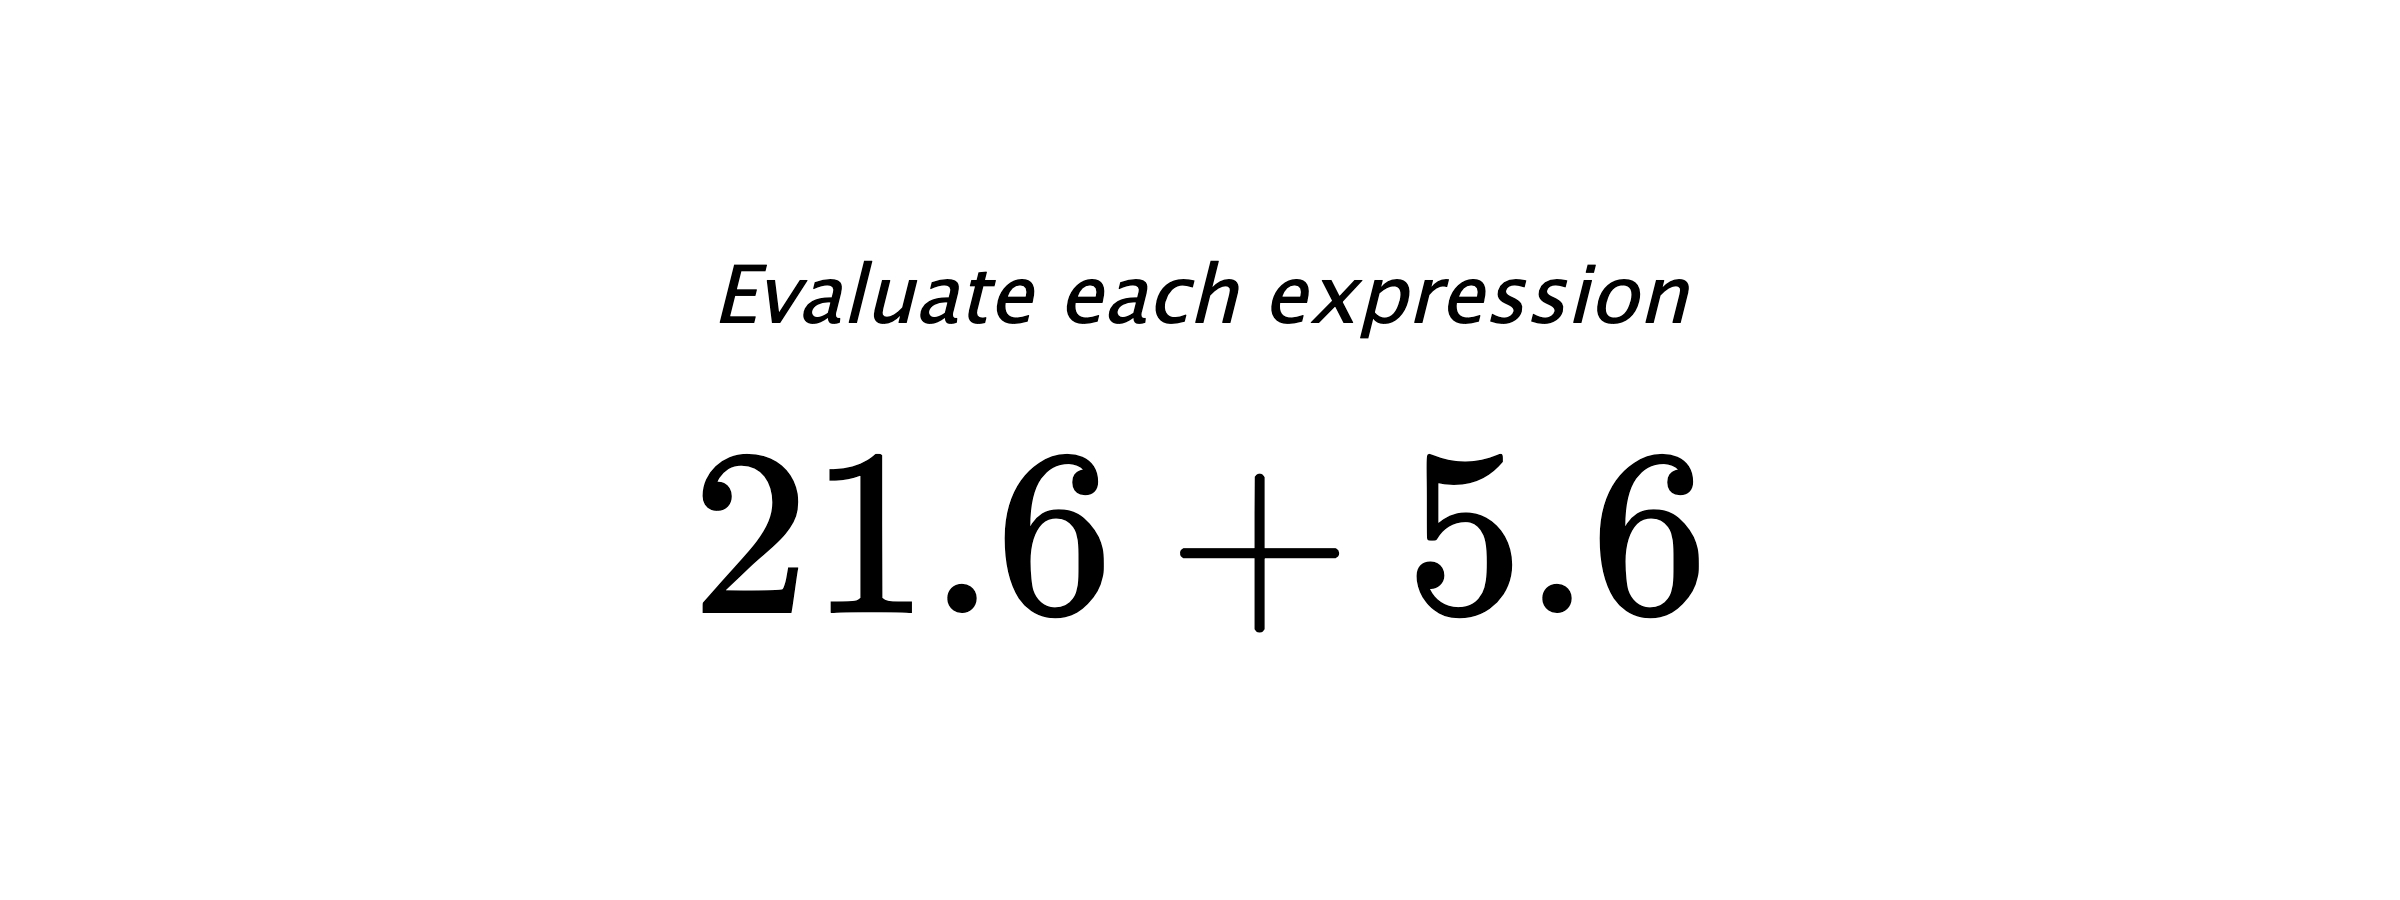 Evaluate each expression $ 21.6+5.6 $